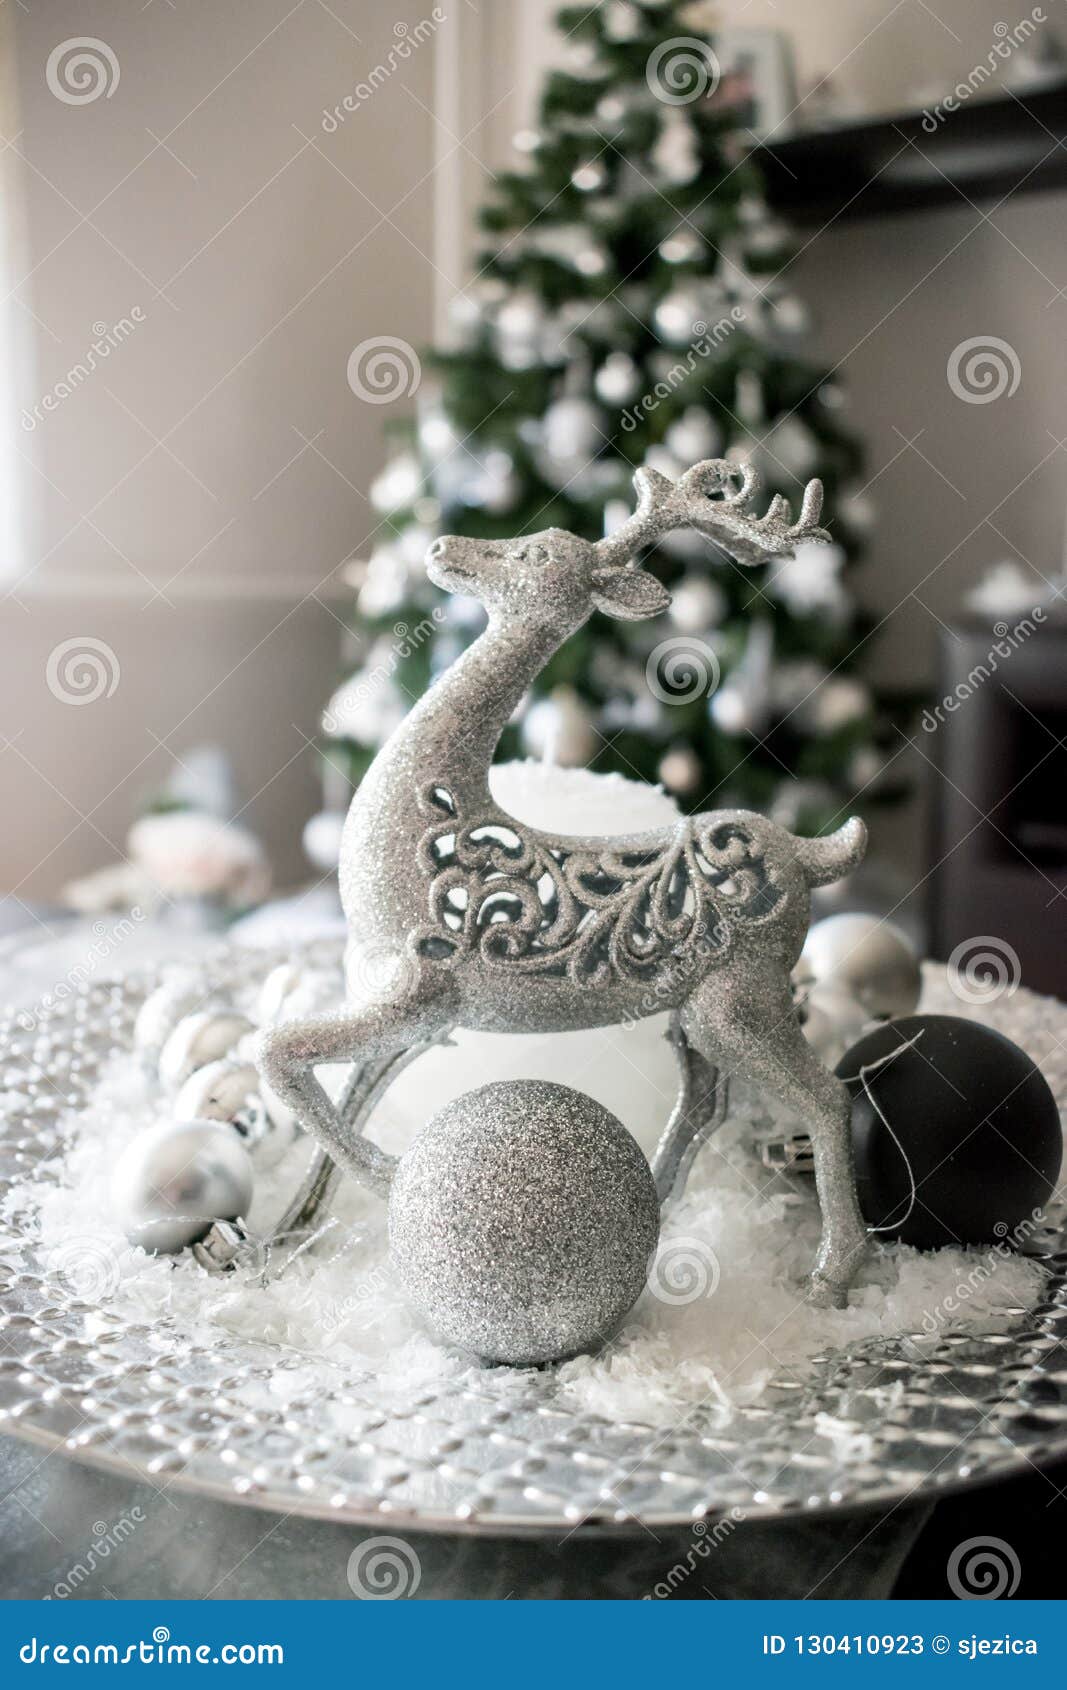 Christmas Tree And Silver Decoration Stock Image Image Of Baubles